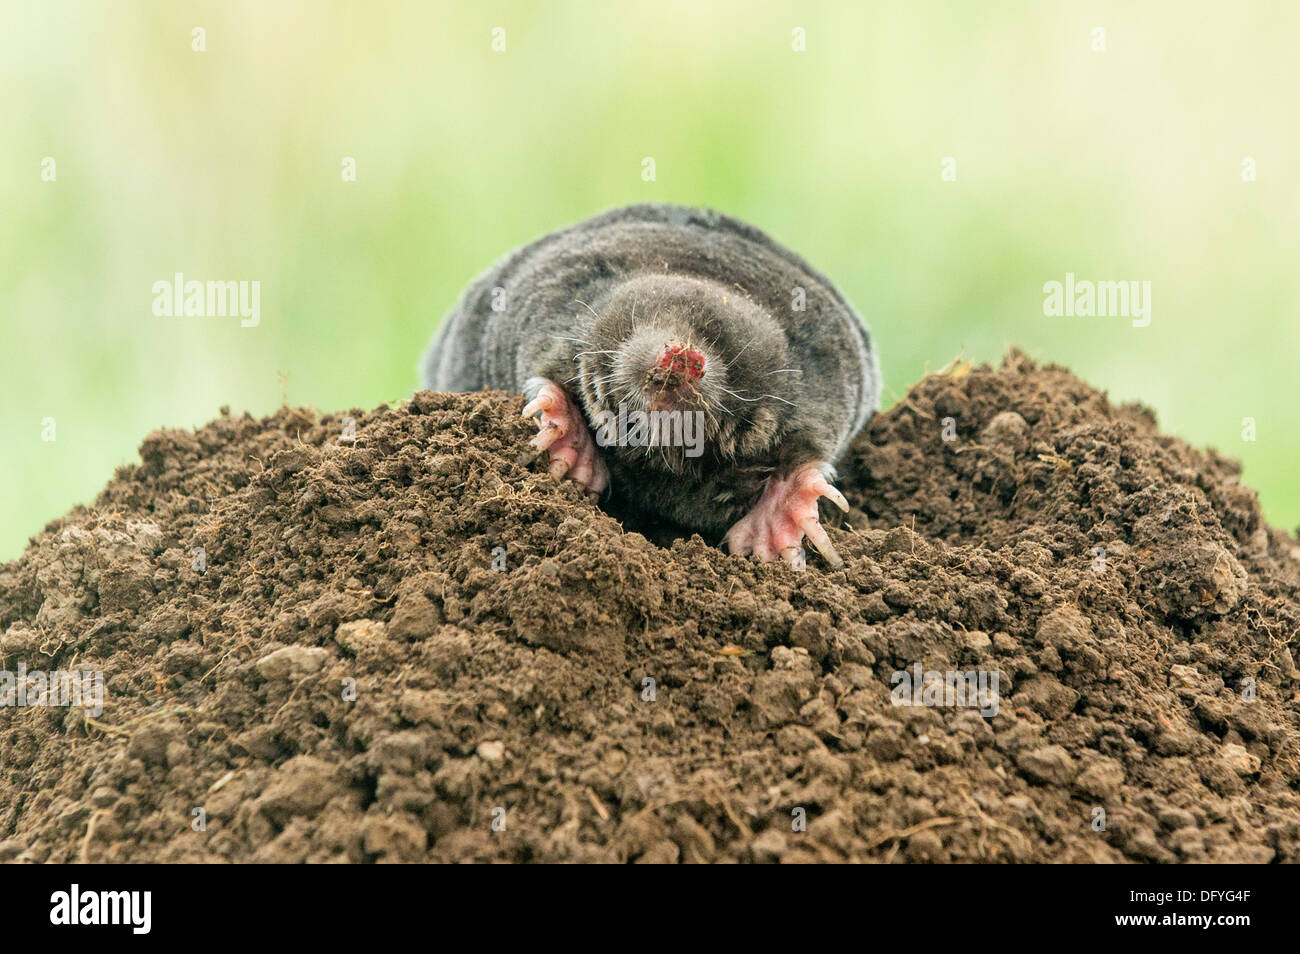 A European Mole emerging from its burrow Stock Photo